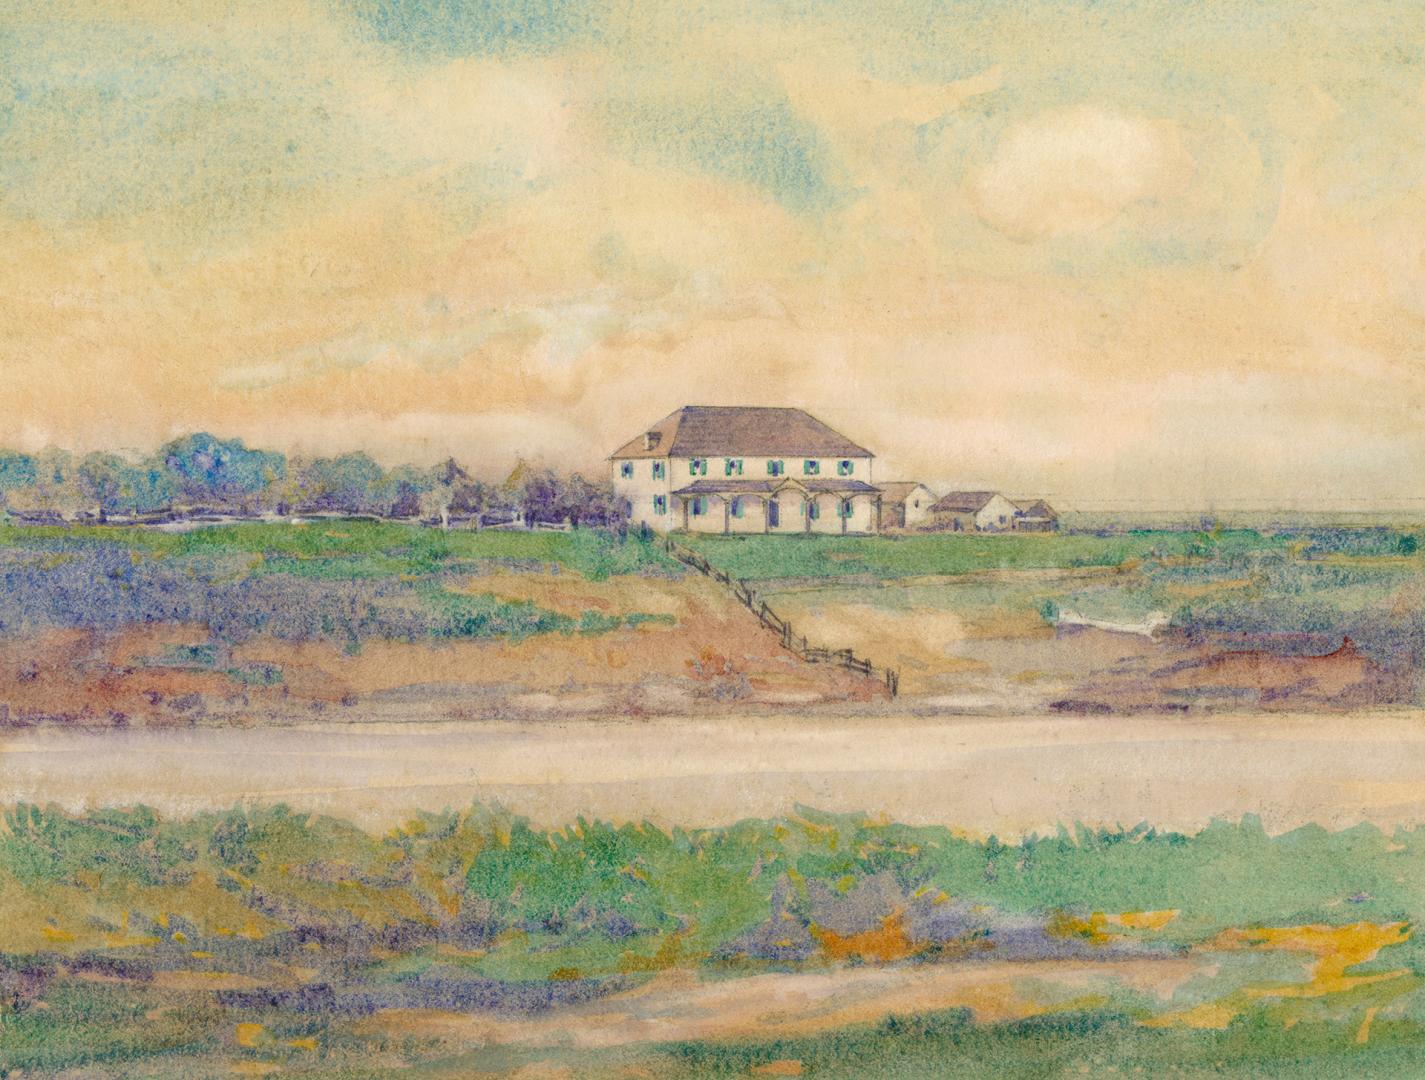 A drawing of a house on a hill above a river.